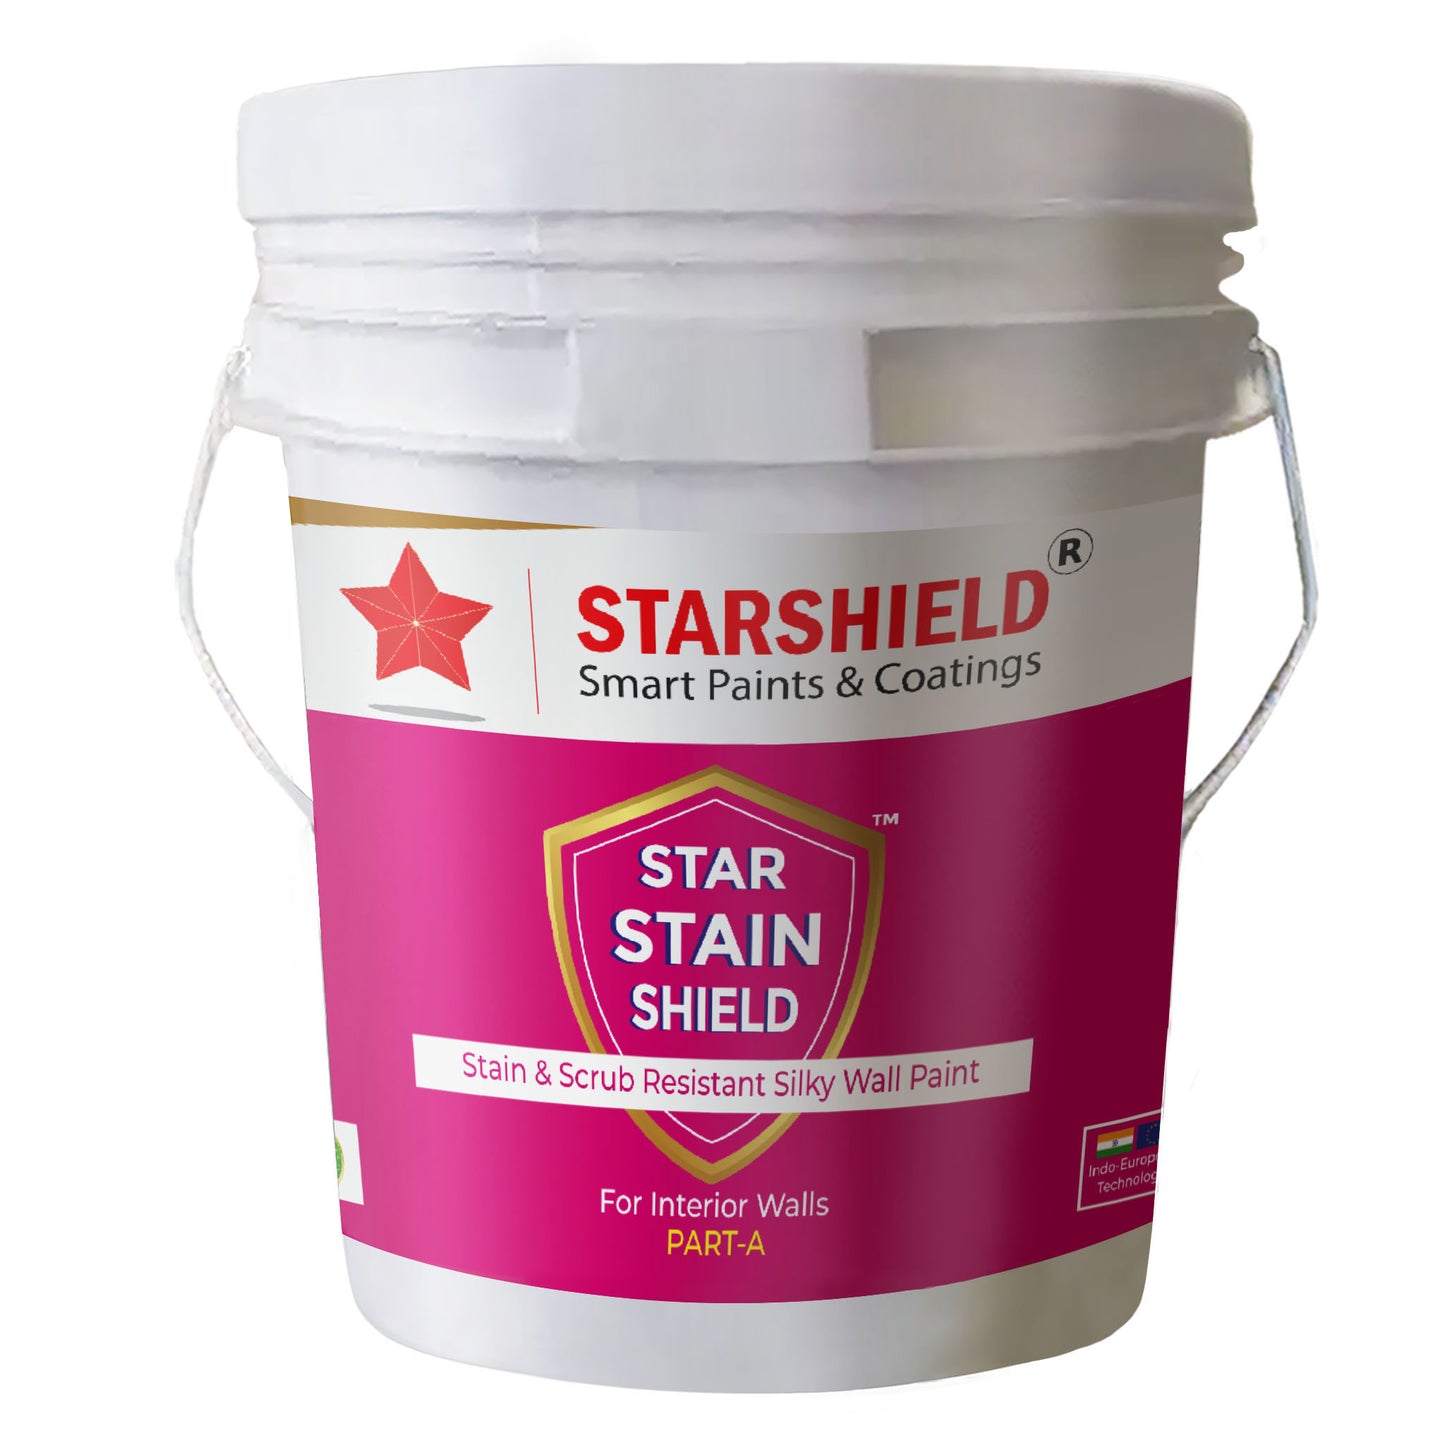 STAR STAIN SHIELD